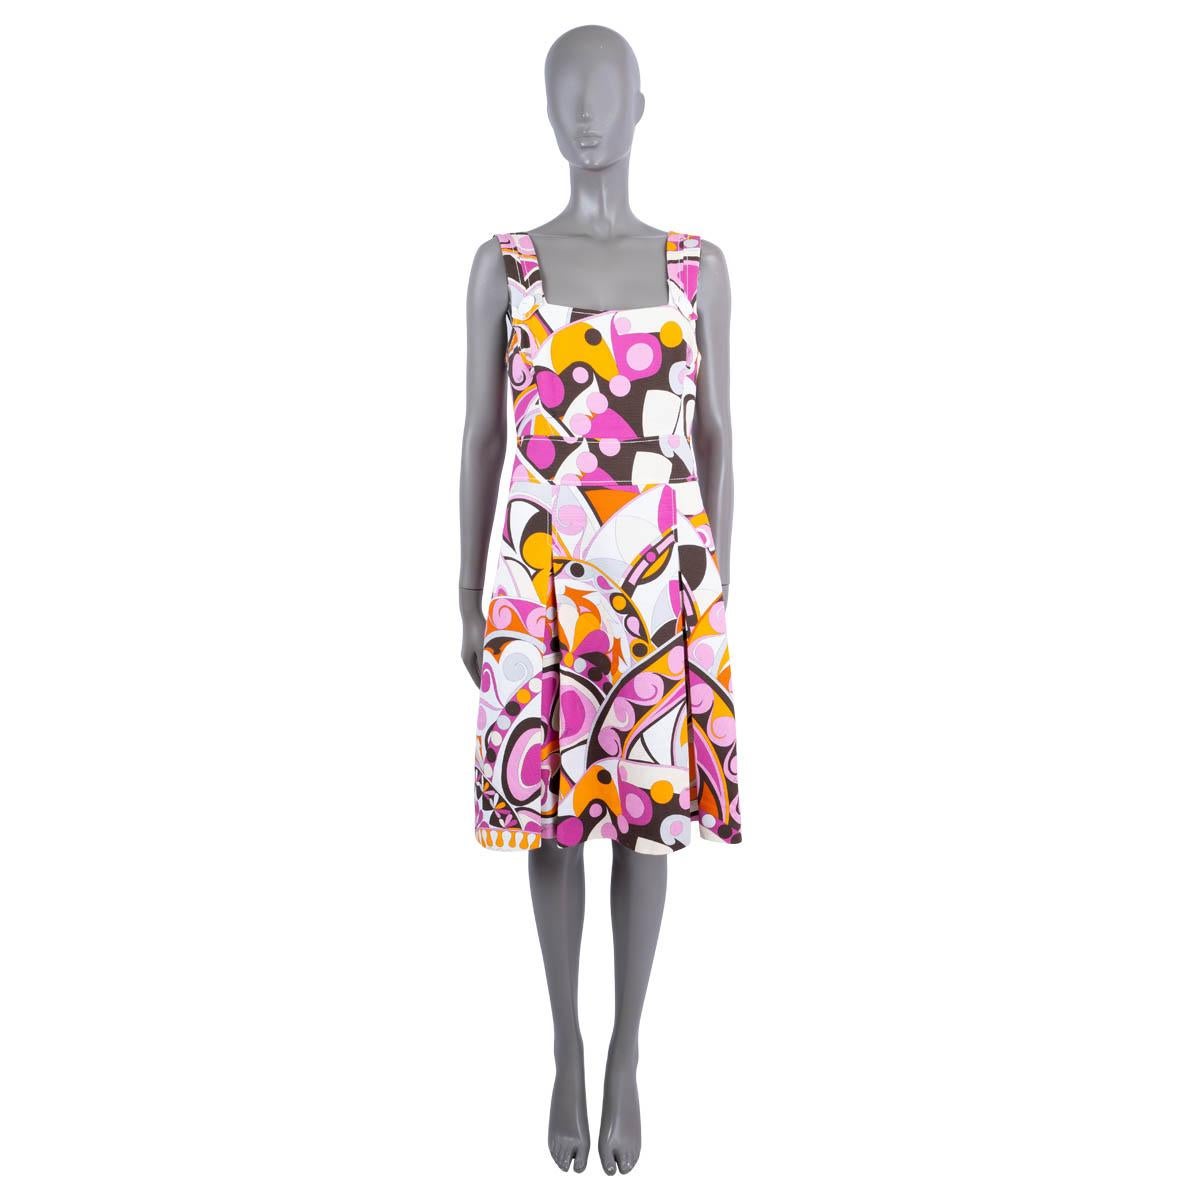 100% authentic Emilio Pucci sleeveless box pleated dress in , white, ivory, pink, Orangel and brown cotton (100%). Features a two pockets on the side and two white buttons on the straps. Opens with a concealed hook and zip in the back. Lined in